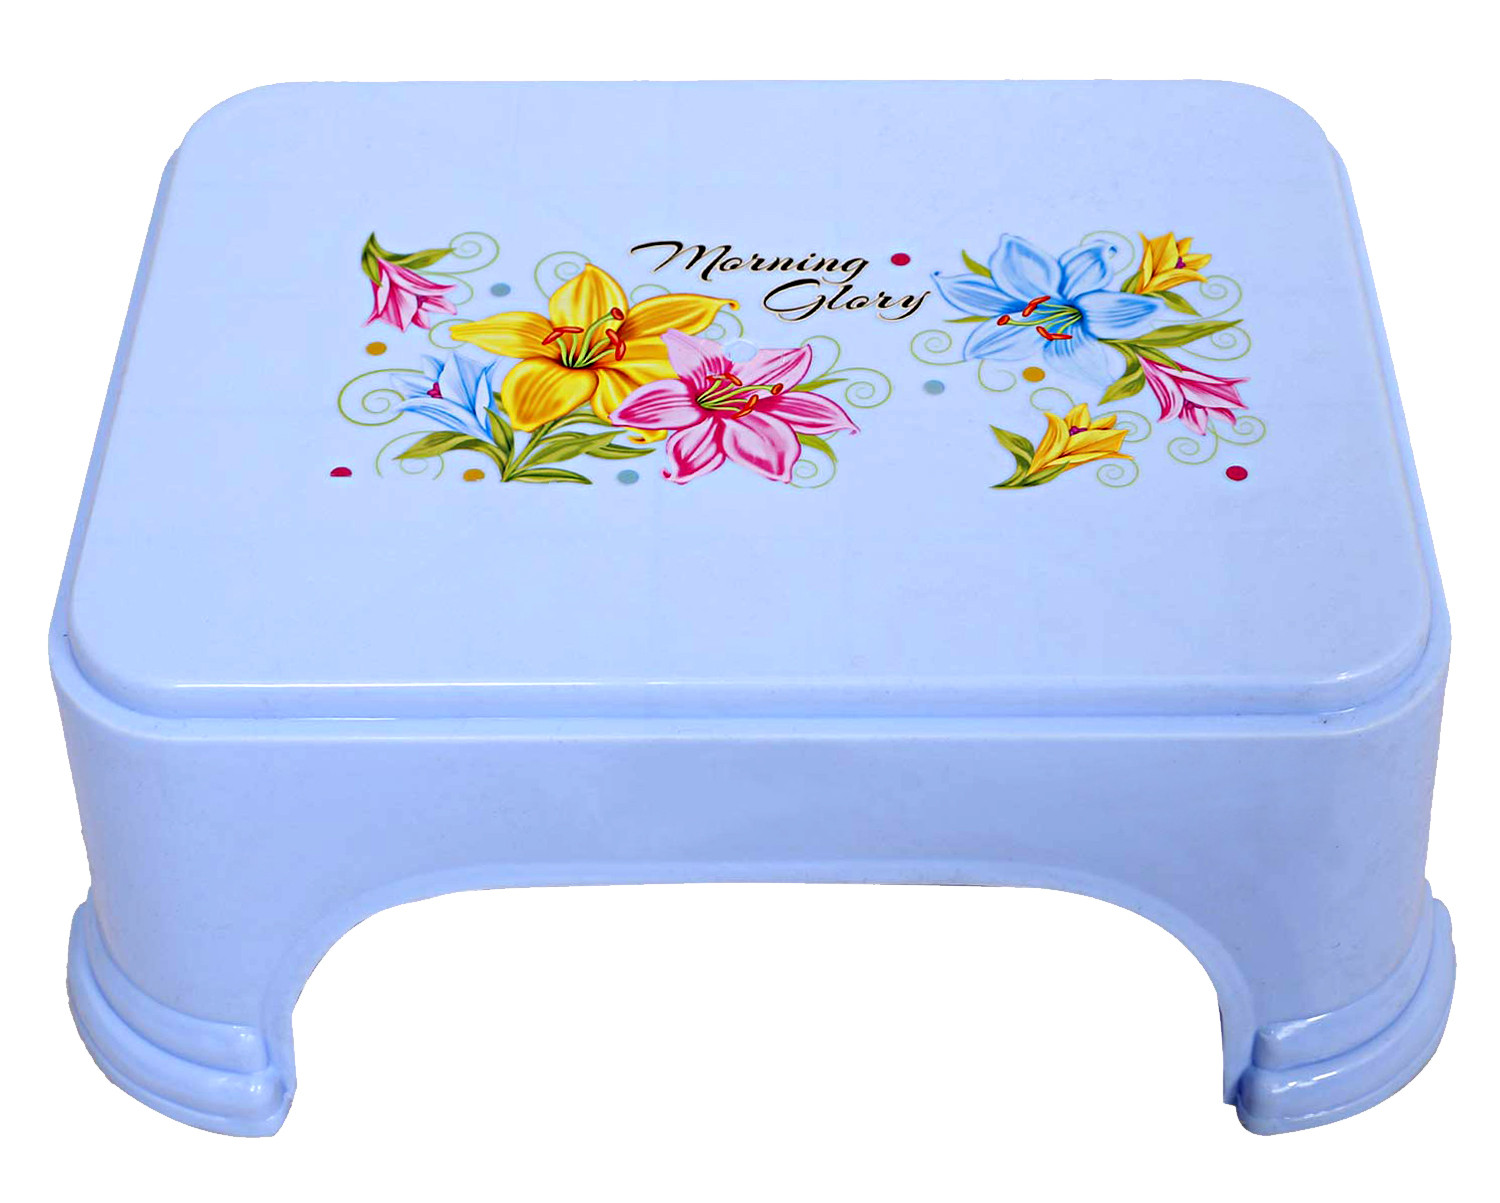 Kuber Industries Floral Print Plastic Bathroom Stool, Adults Simple Style Stool Anti-Slip with Strong Bearing Stool for Home, Office, Kindergarten, Blue